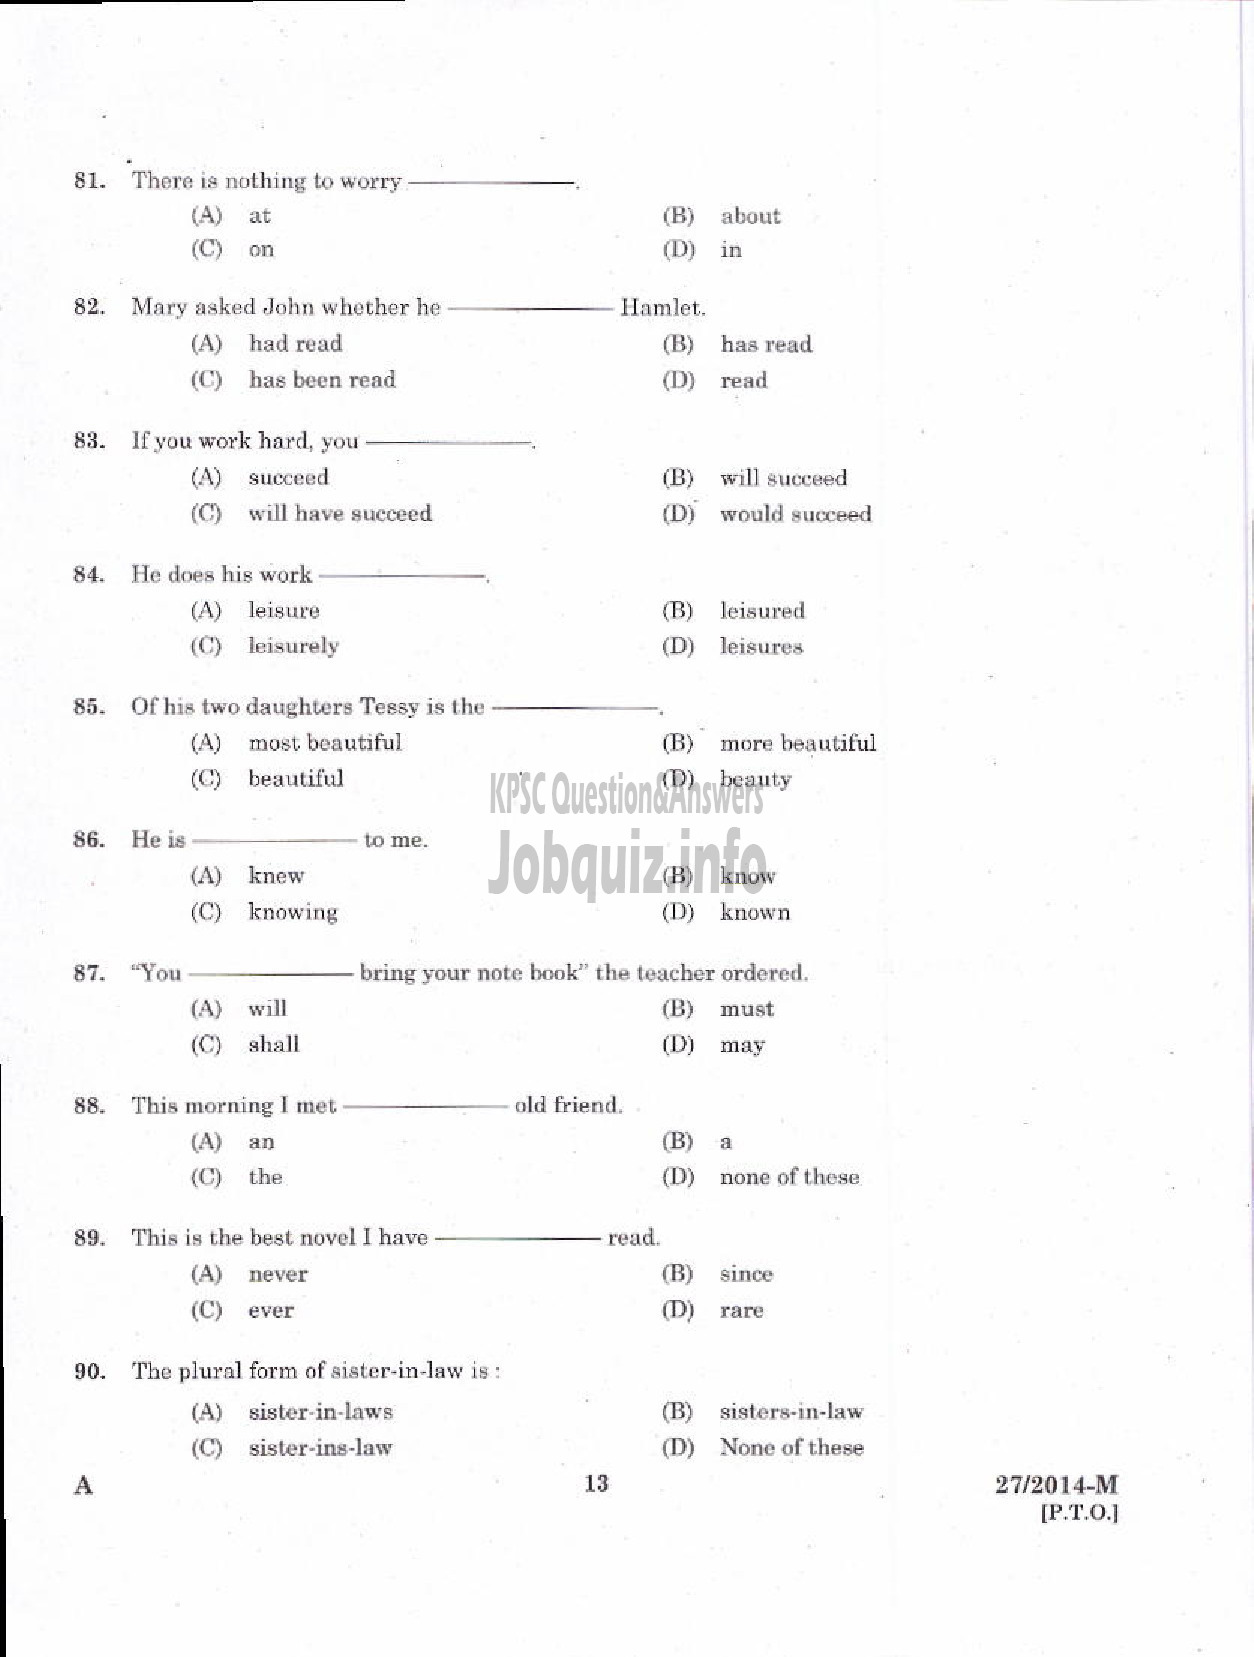 Kerala PSC Question Paper - LOWER DIVISION CLERK 2014 VARIOUS BY TRANSFER ( Malayalam ) -11